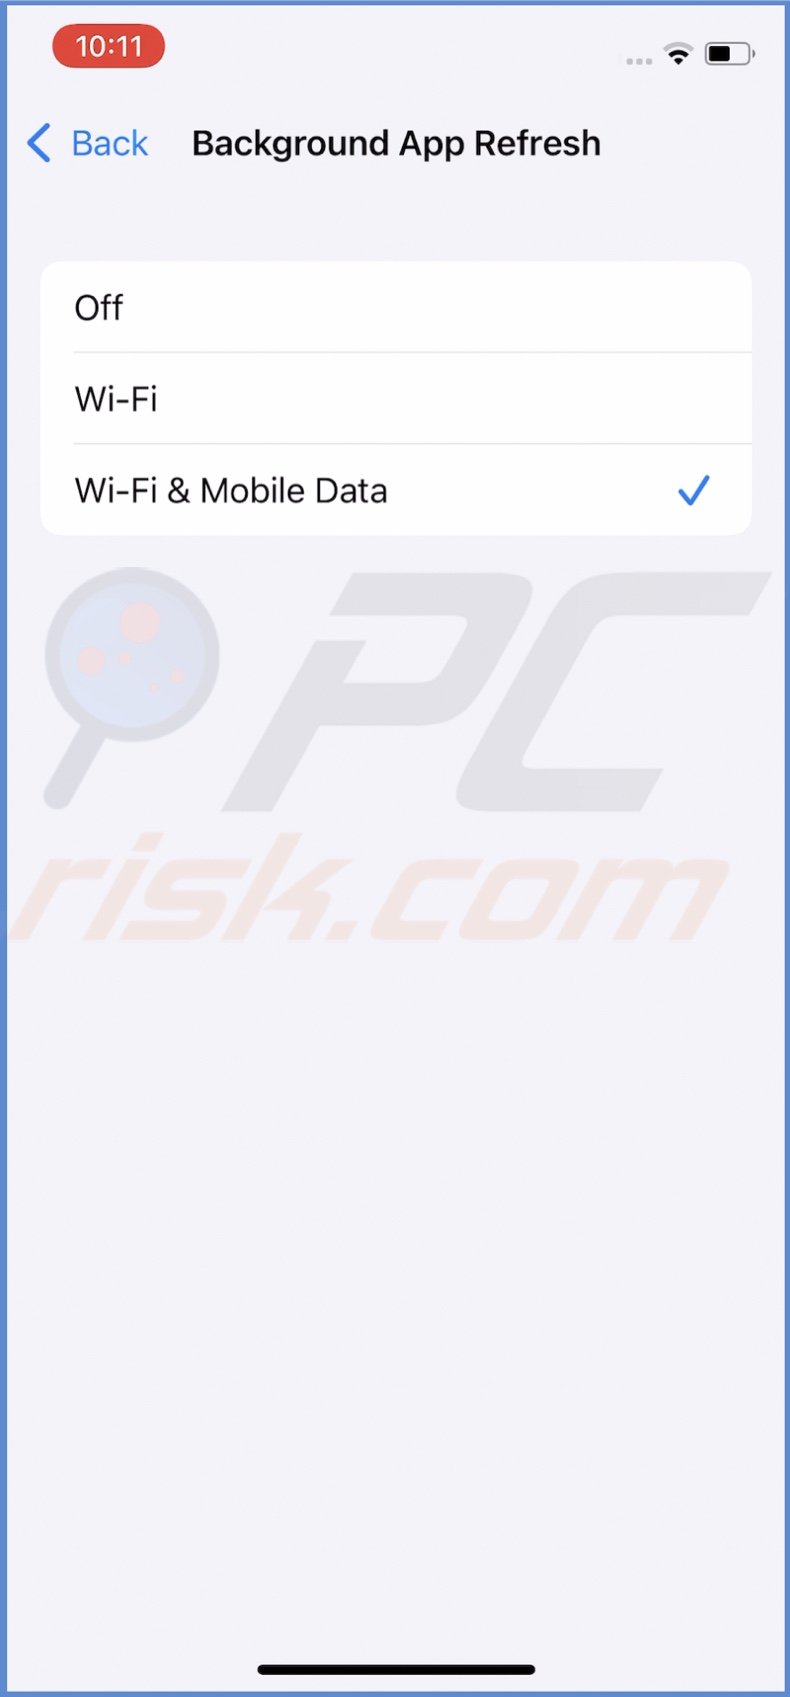 Select Wi-Fi or Wi-FI and Mobile Data